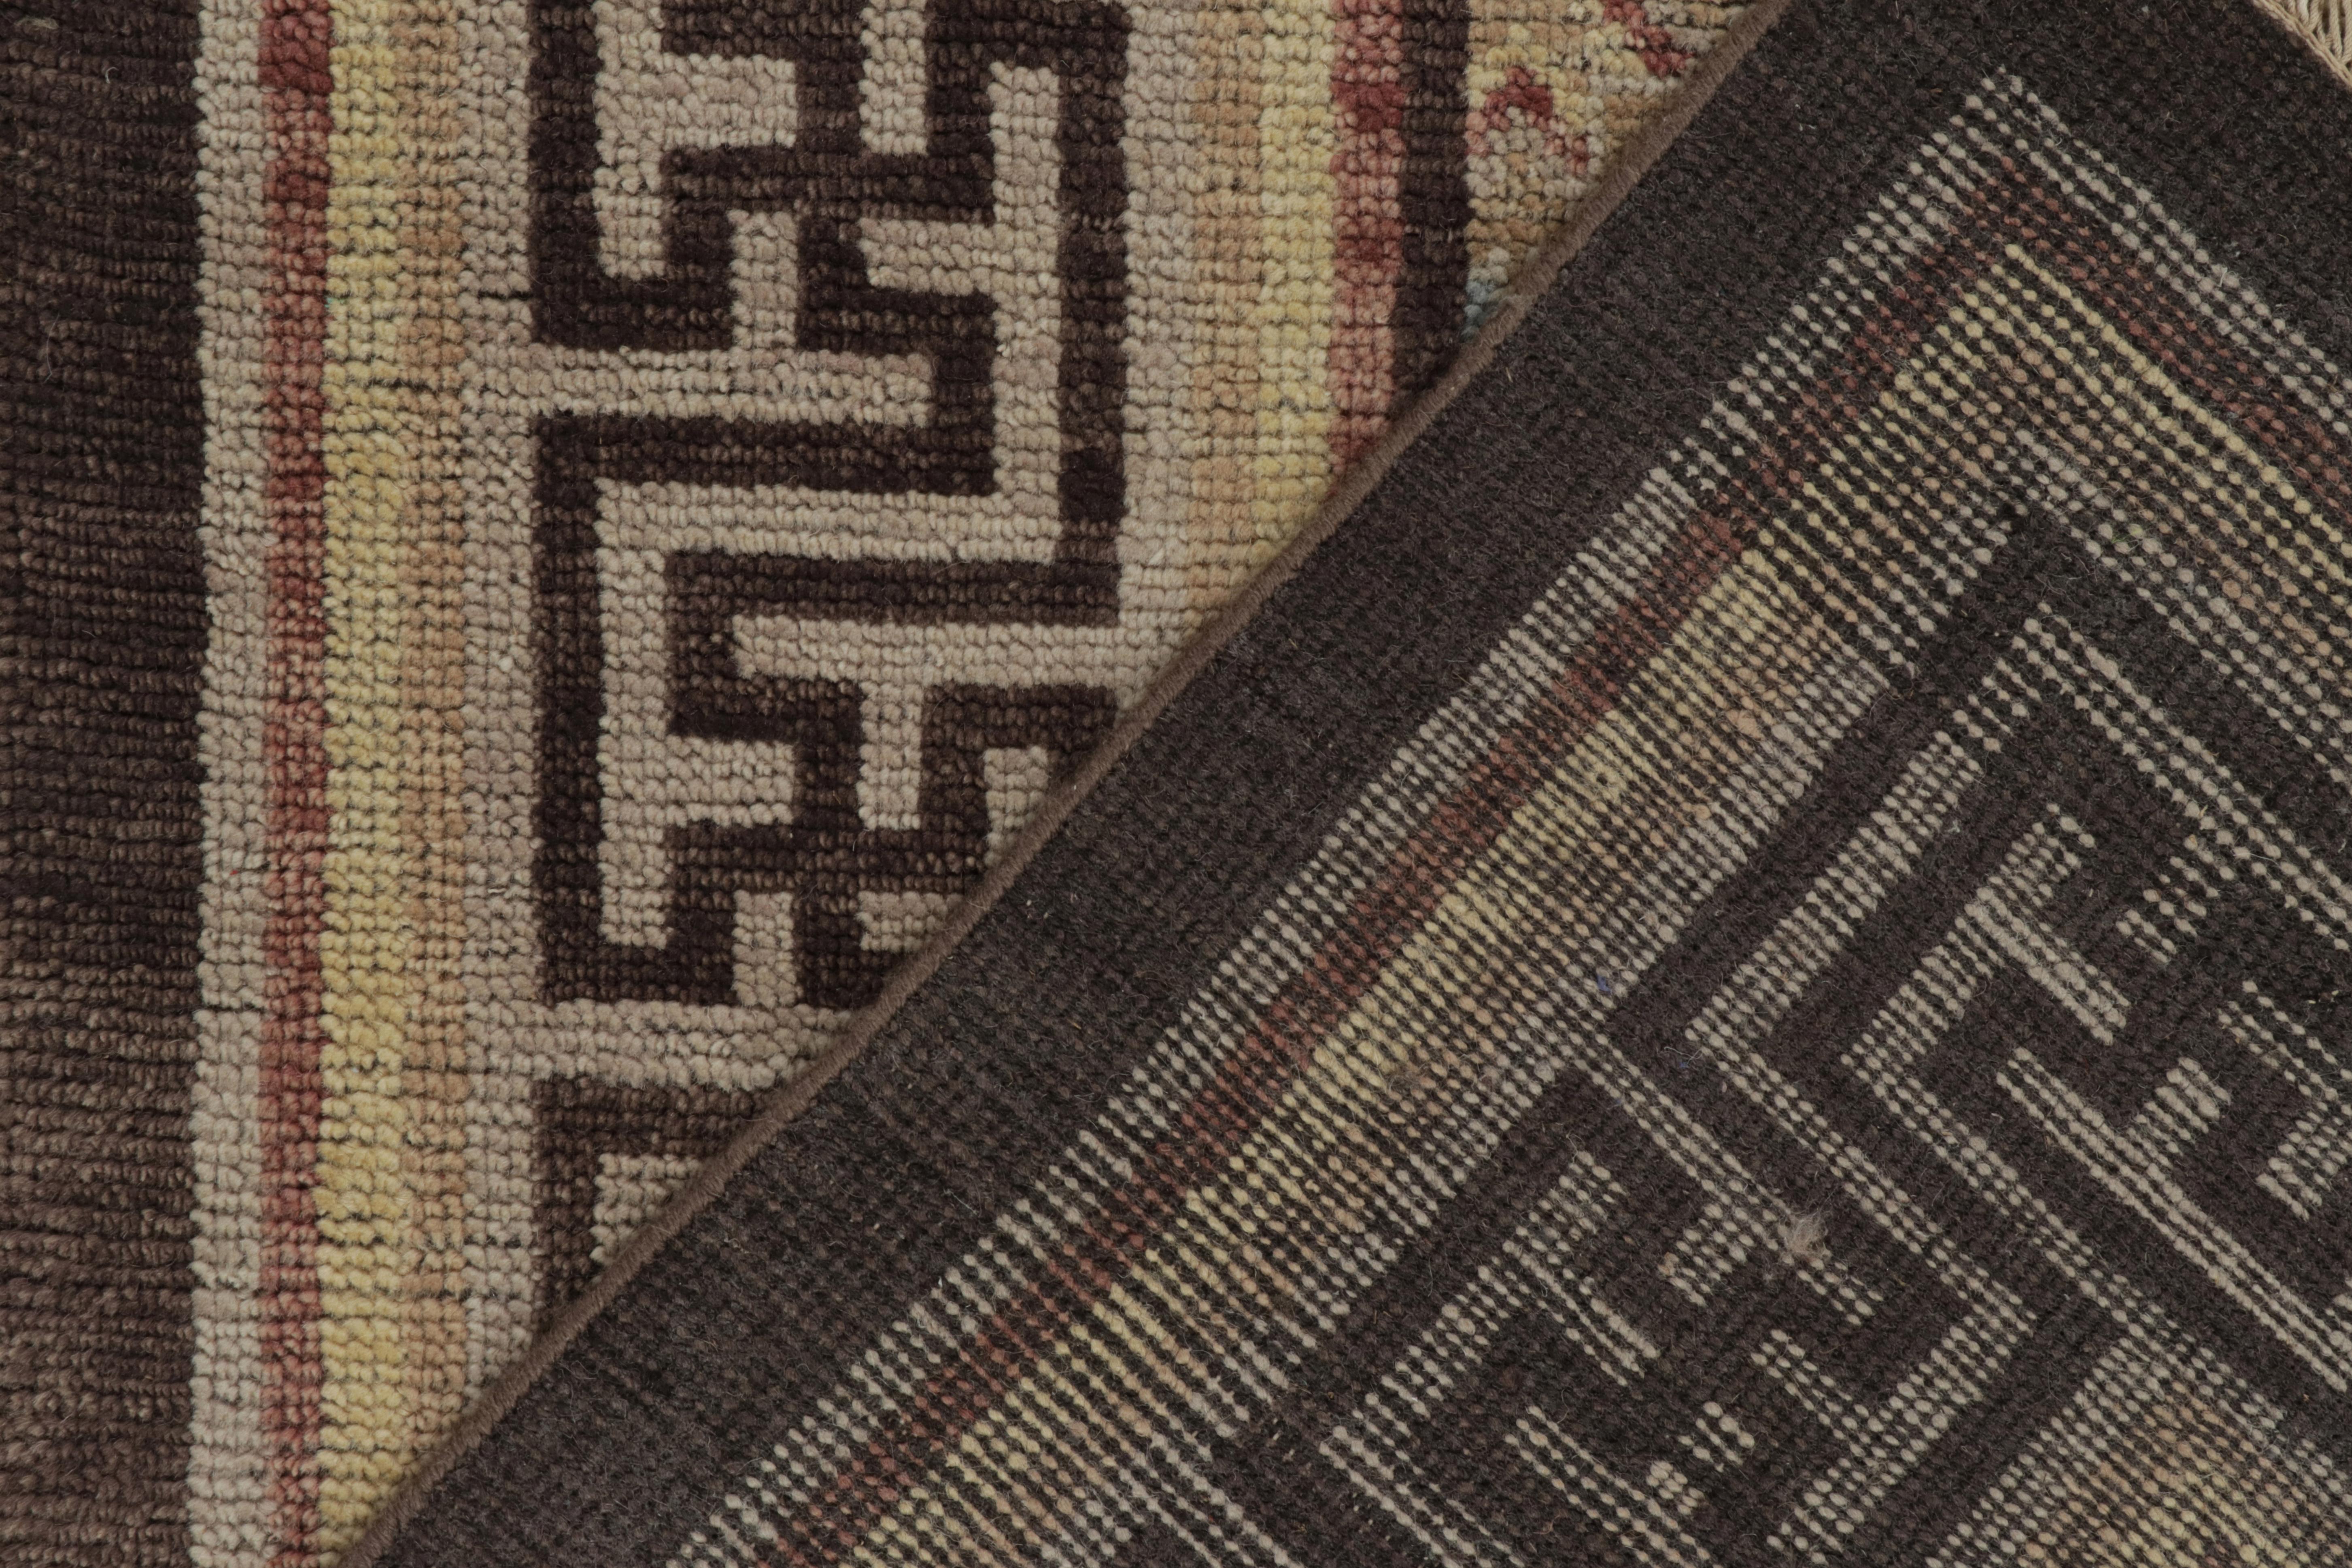 Wool Rug & Kilim’s 18th Century Chinese Style Rug in Beige-Brown and Blue Patterns For Sale